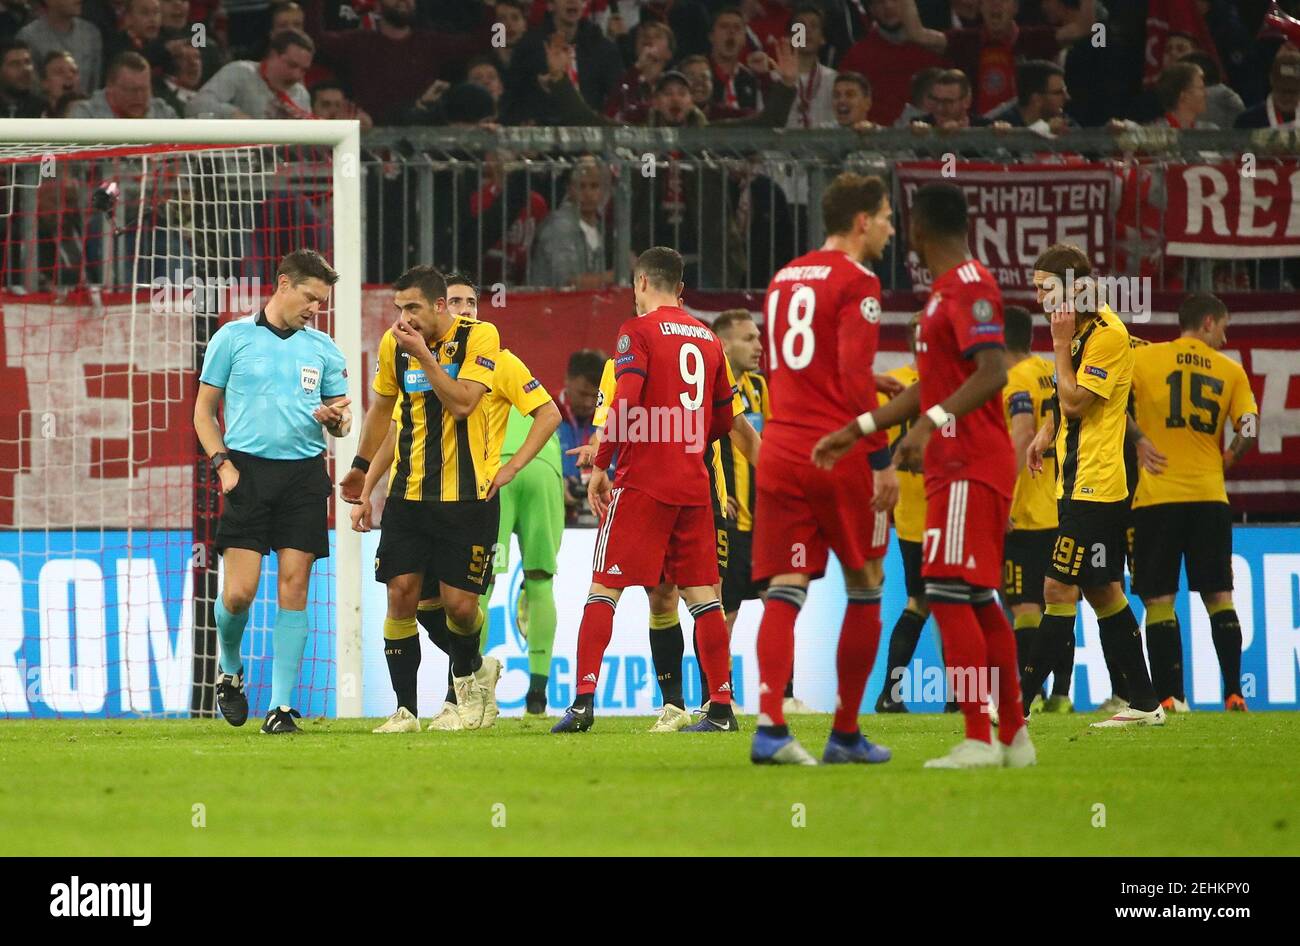 Soccer Football - Champions League - Group Stage - Group E - Bayern Munich v AEK Athens - Allianz Arena, Munich, Germany - November 7, 2018  AEK Athens' Vasilis Lampropoulos remonstrates with referee Matej Jug after a penalty is awarded to Bayern Munich  REUTERS/Michael Dalder Stock Photo